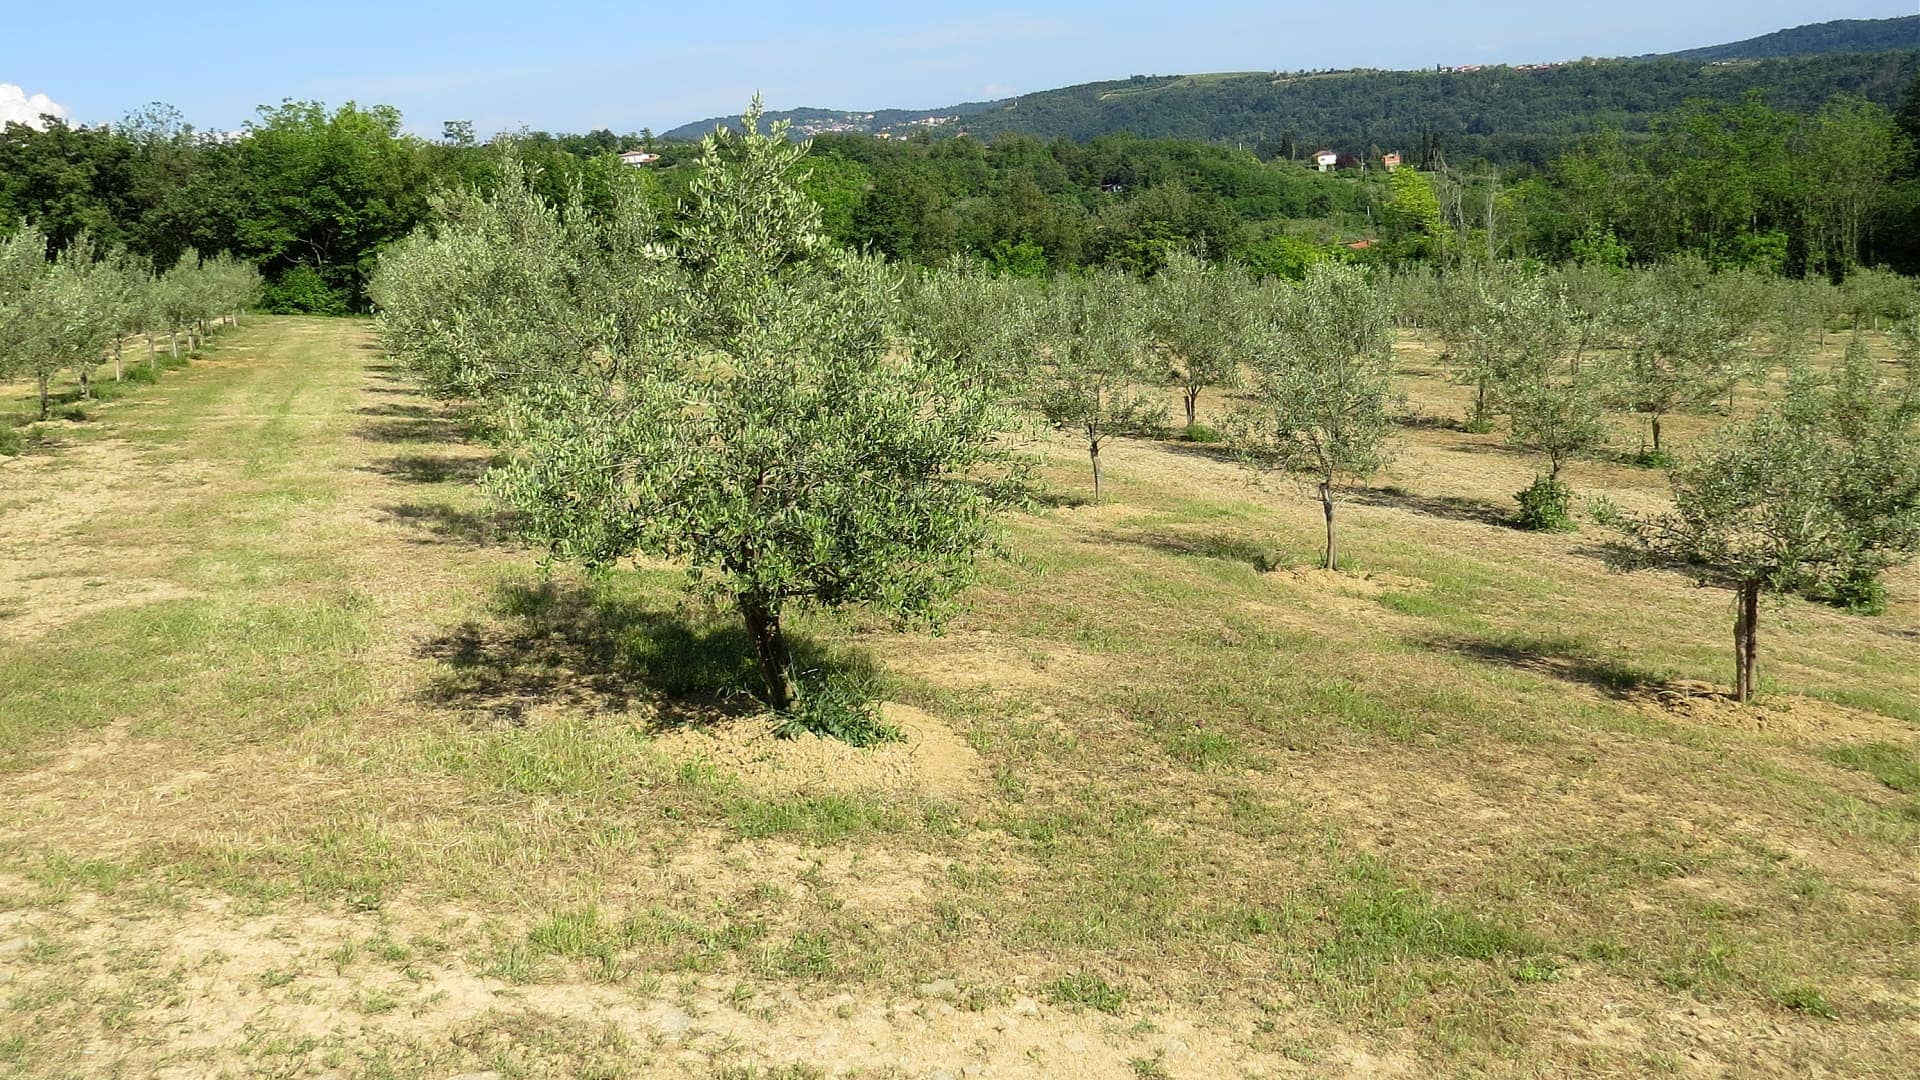 profiles-production-in-slovenia-fruitful-harvest-despite-dry-pests-times-of-olive-oil